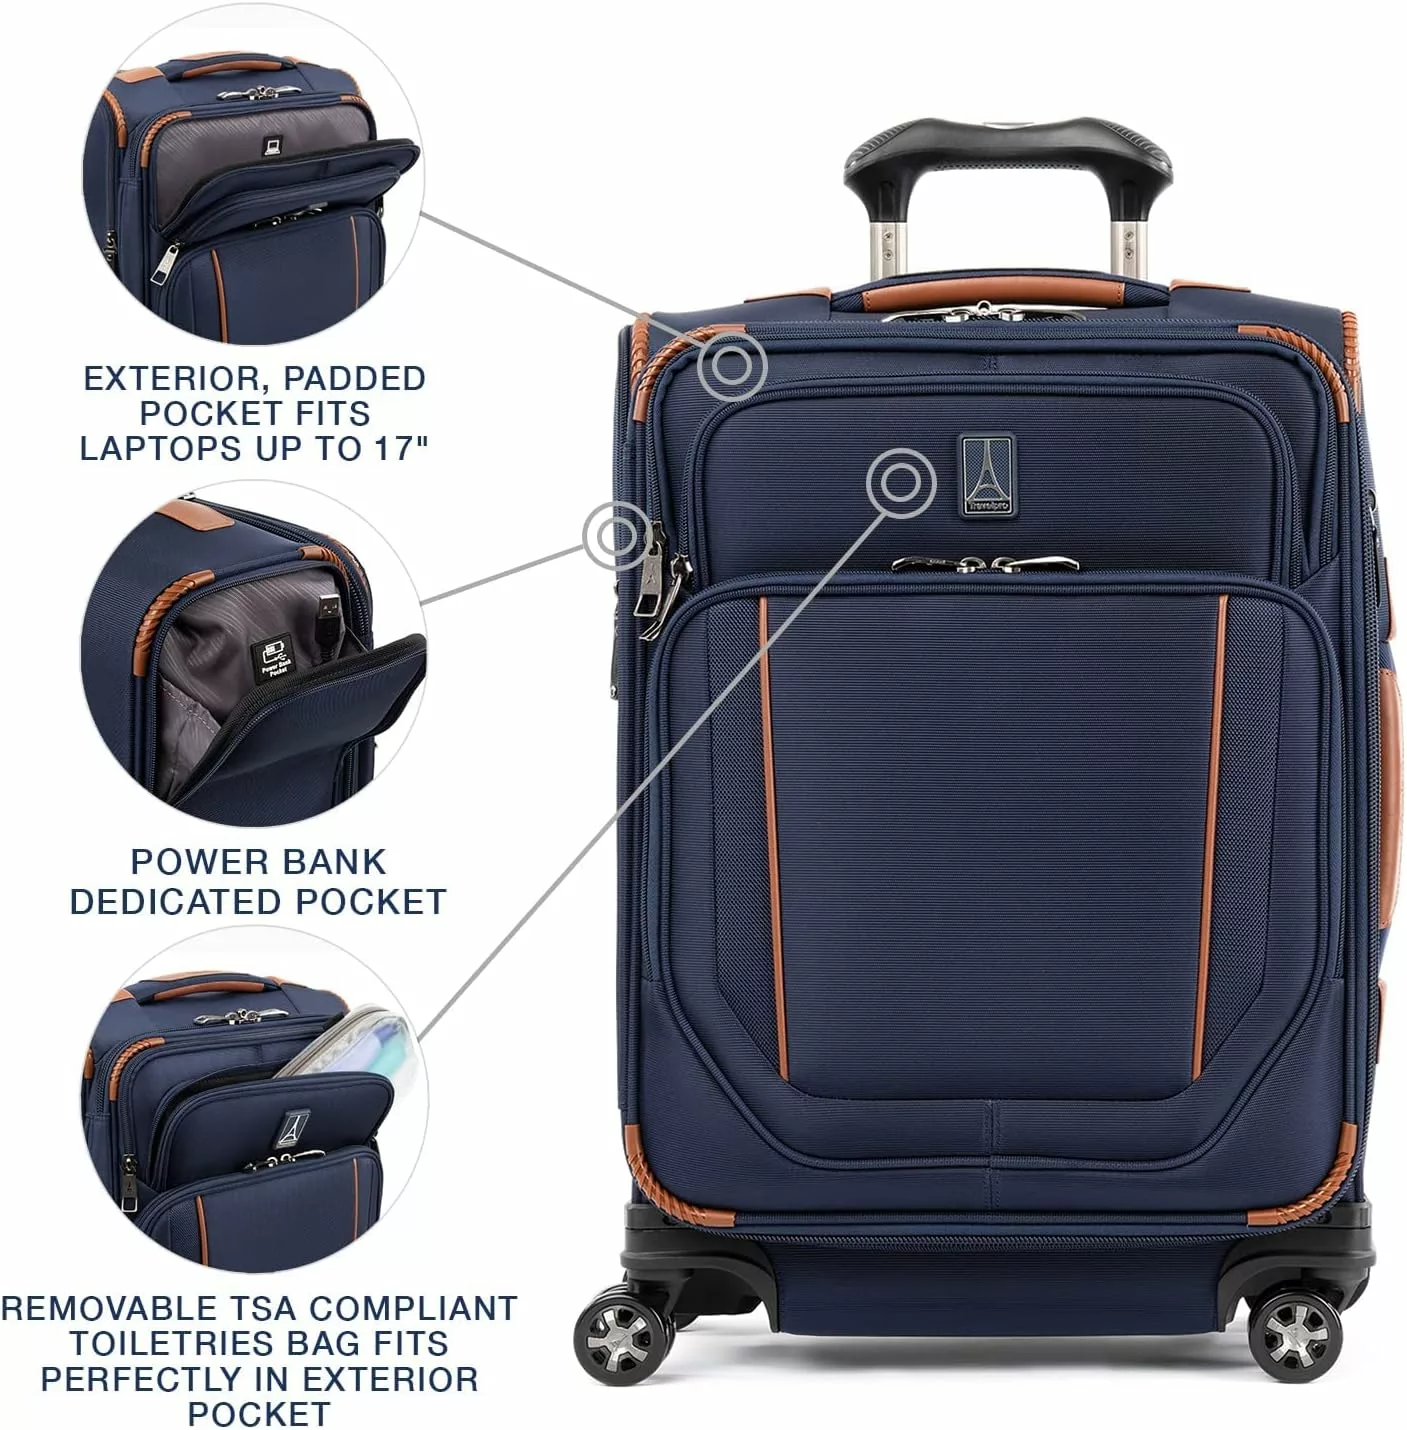 Travelpro Crew Versapack Softside Expandable Spinner Wheel Luggage, Patriot Blue, Carry-On 21-Inch, Crew Versapack Softside Expandable Spinner Wheel Luggage